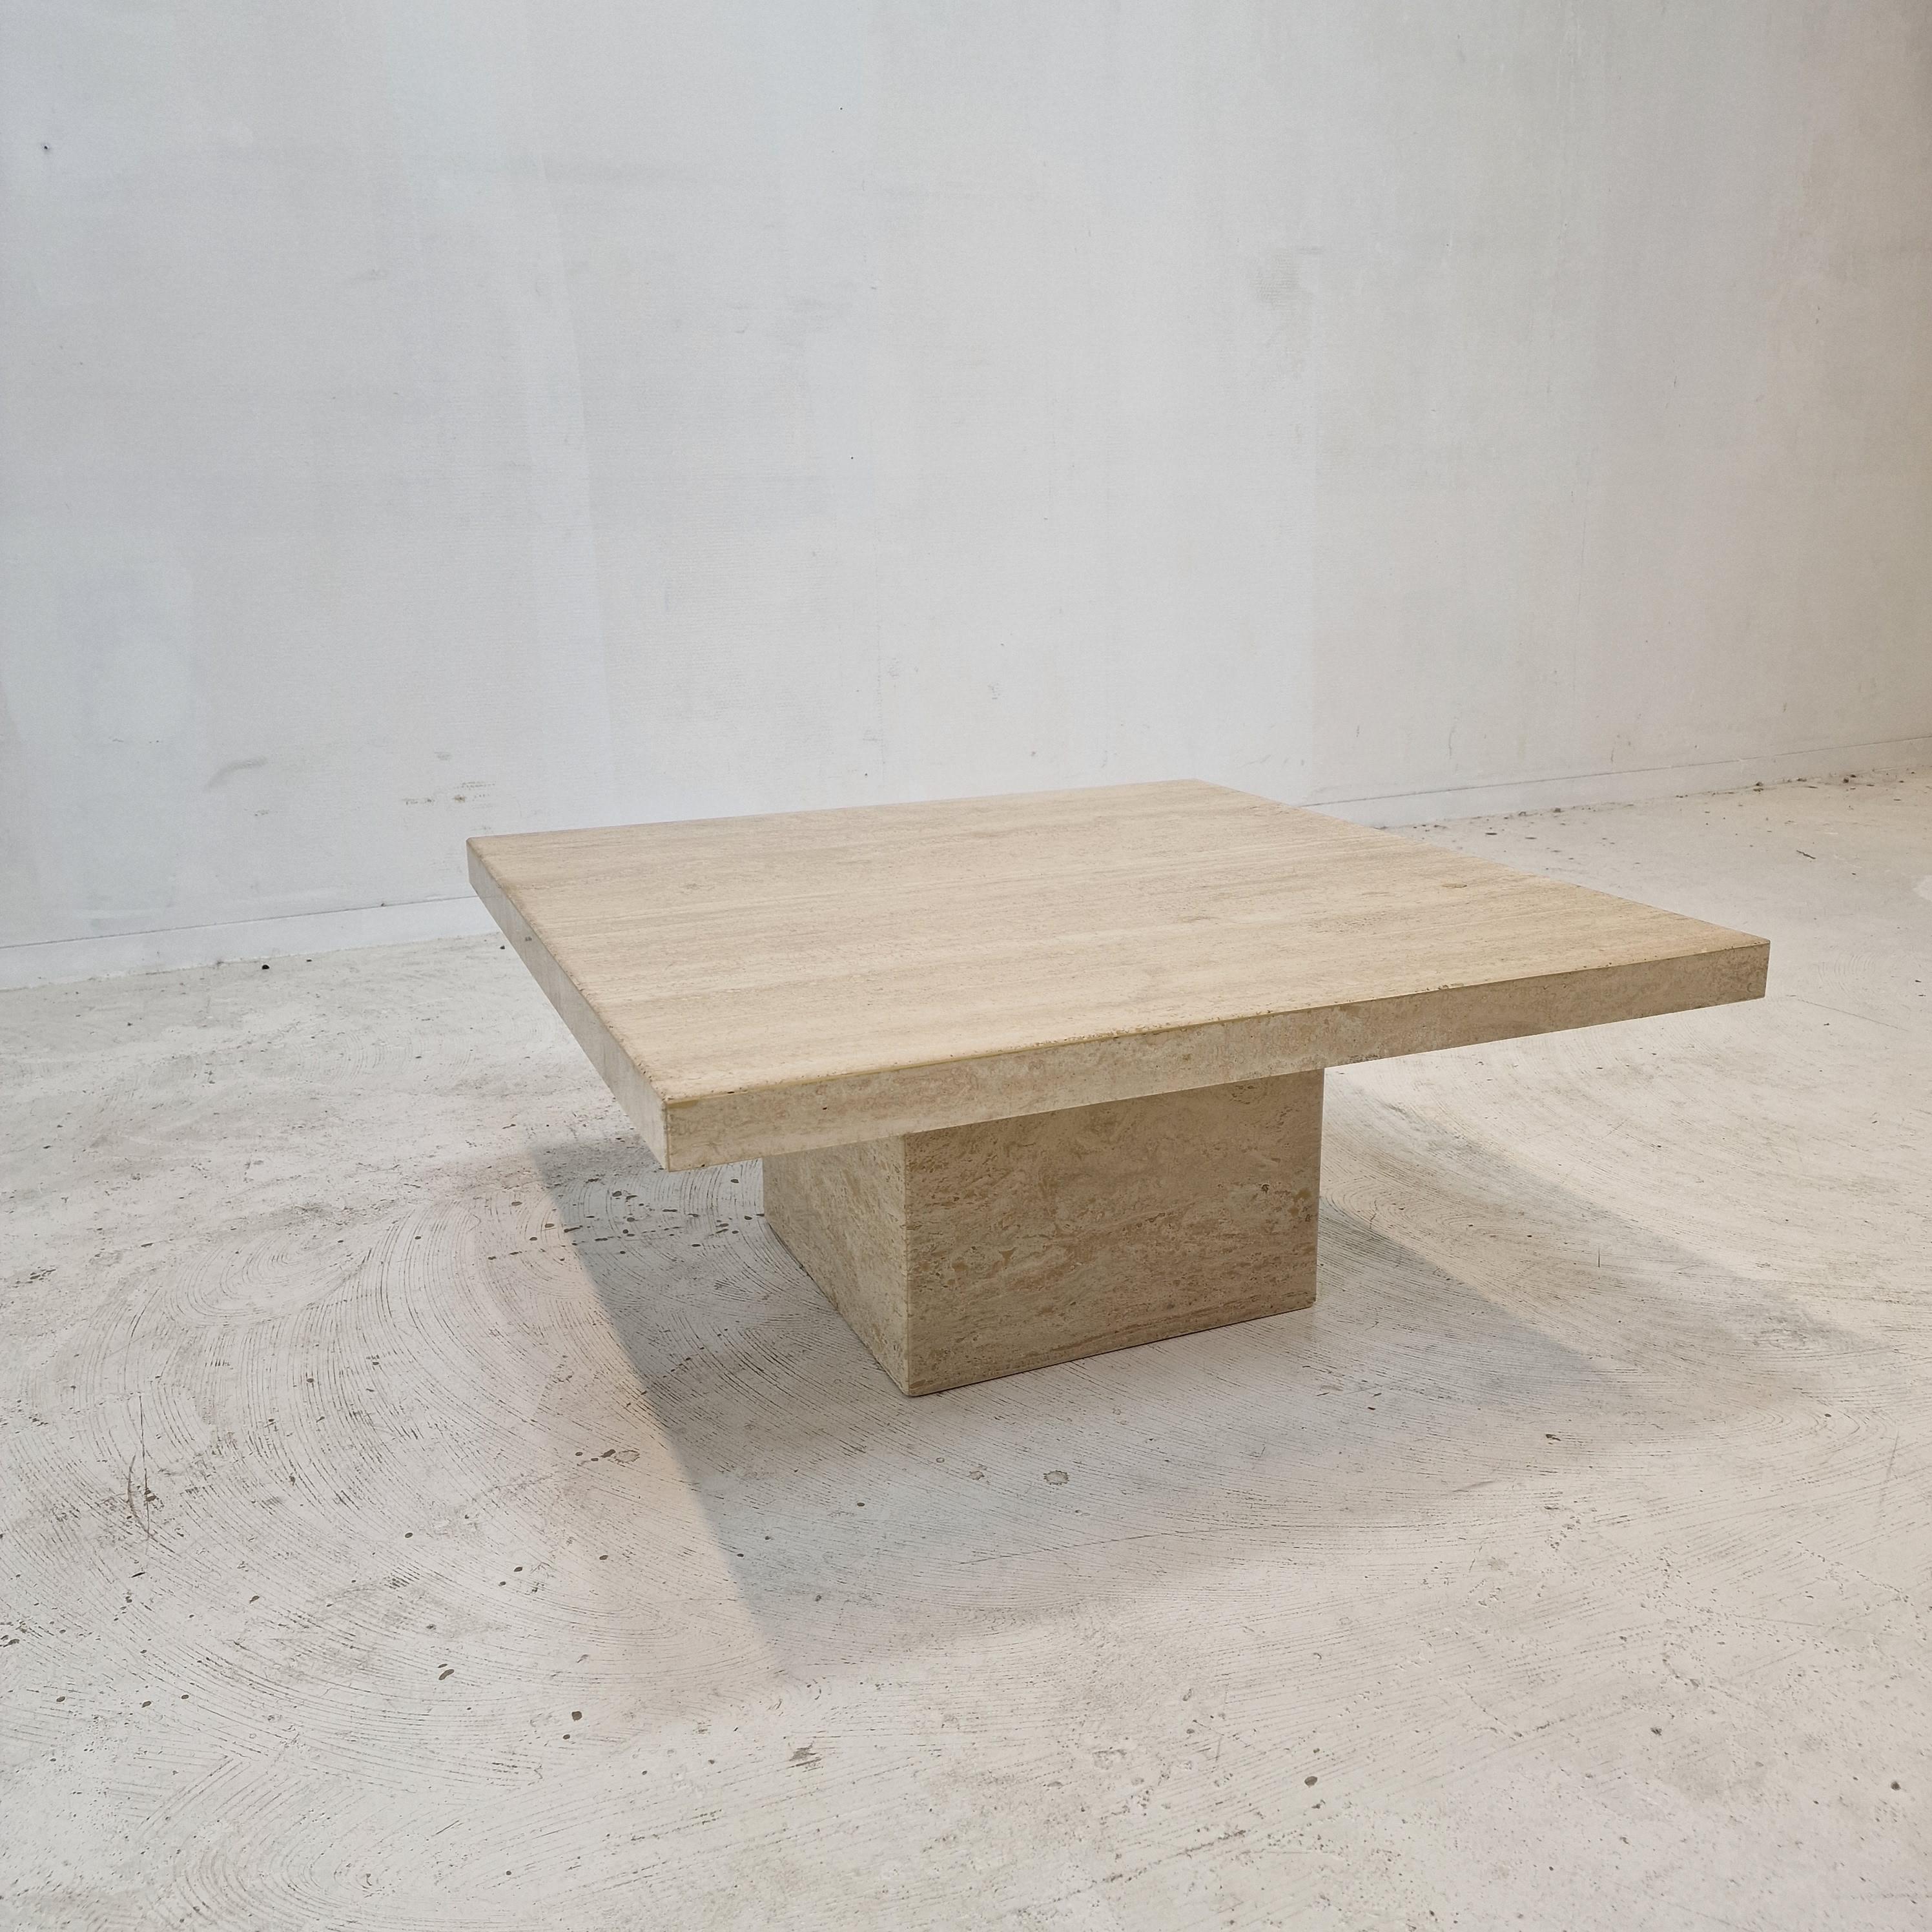 Late 20th Century Italian Square Coffee Table in Travertine, 1980s For Sale